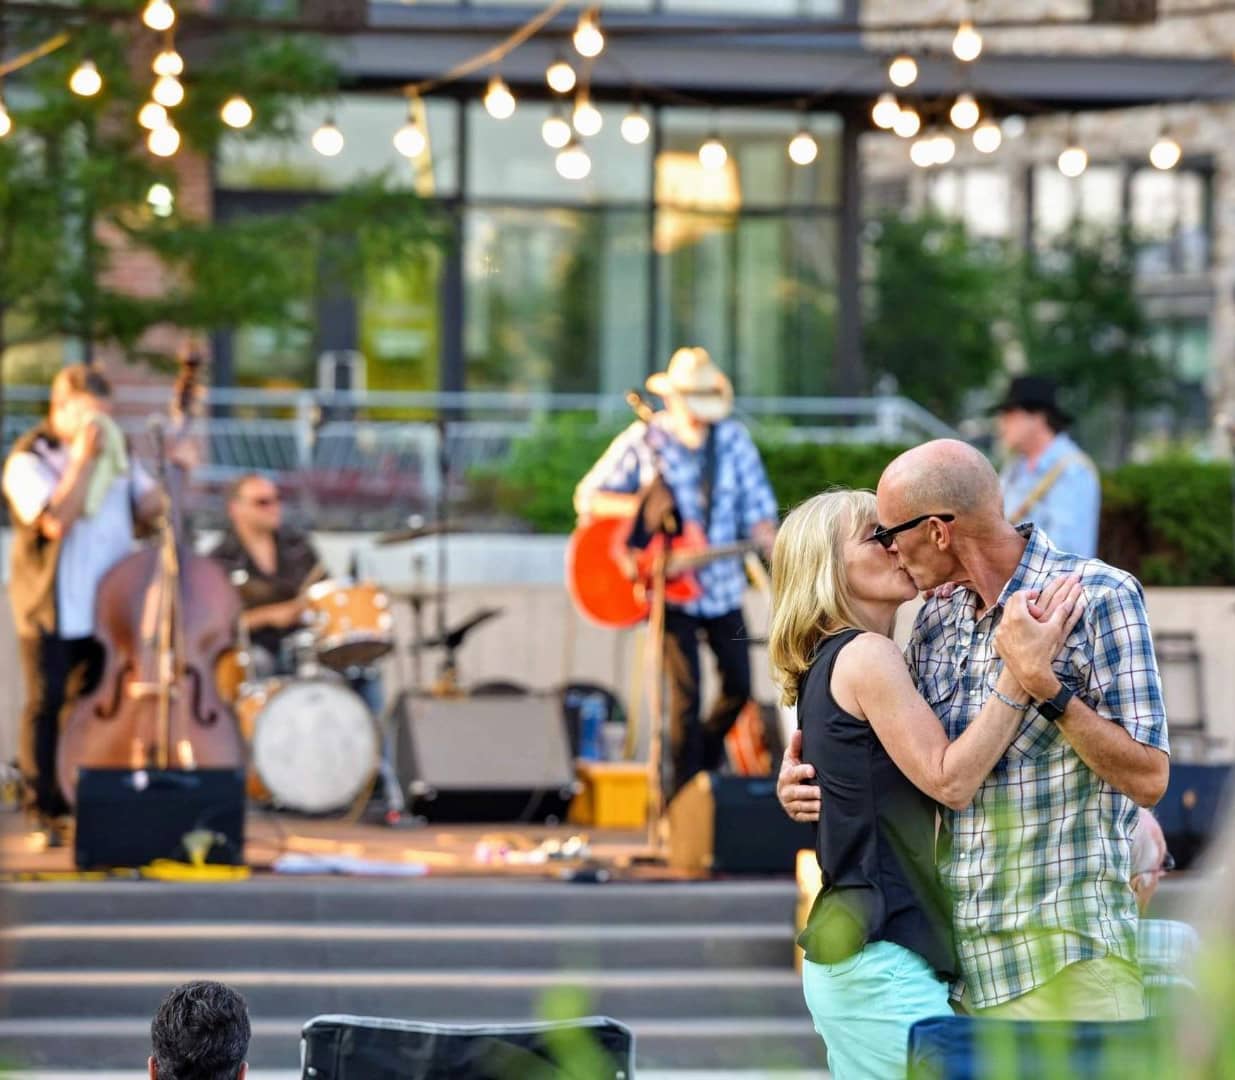 Couple kissing and dancing in front of live music with a stage and band in the background.